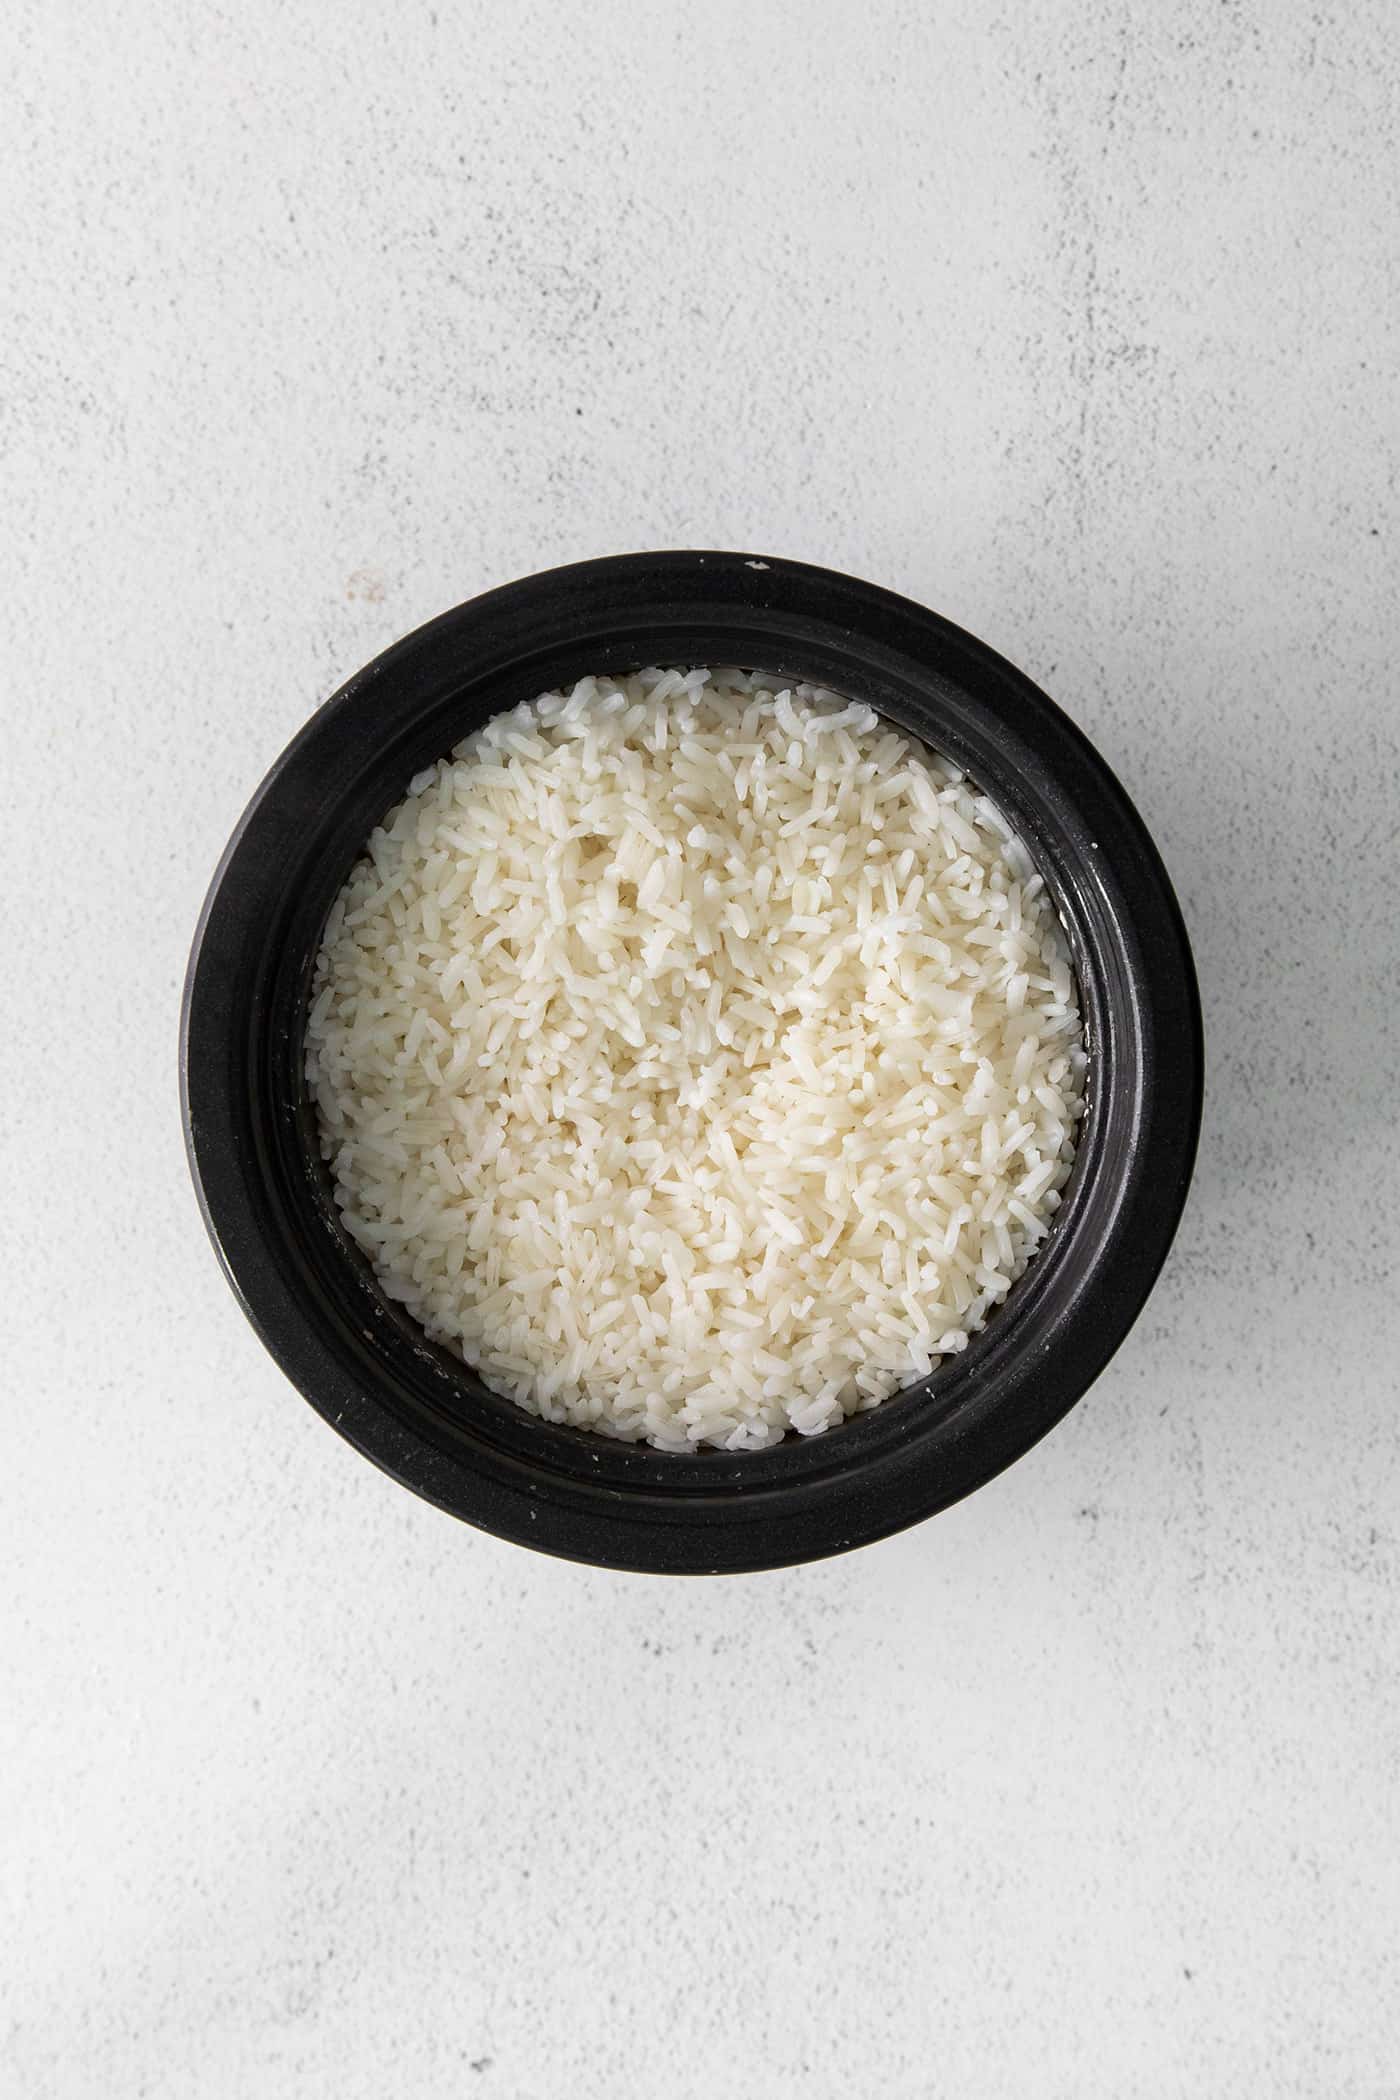 Cooked sushi rice in a black dish